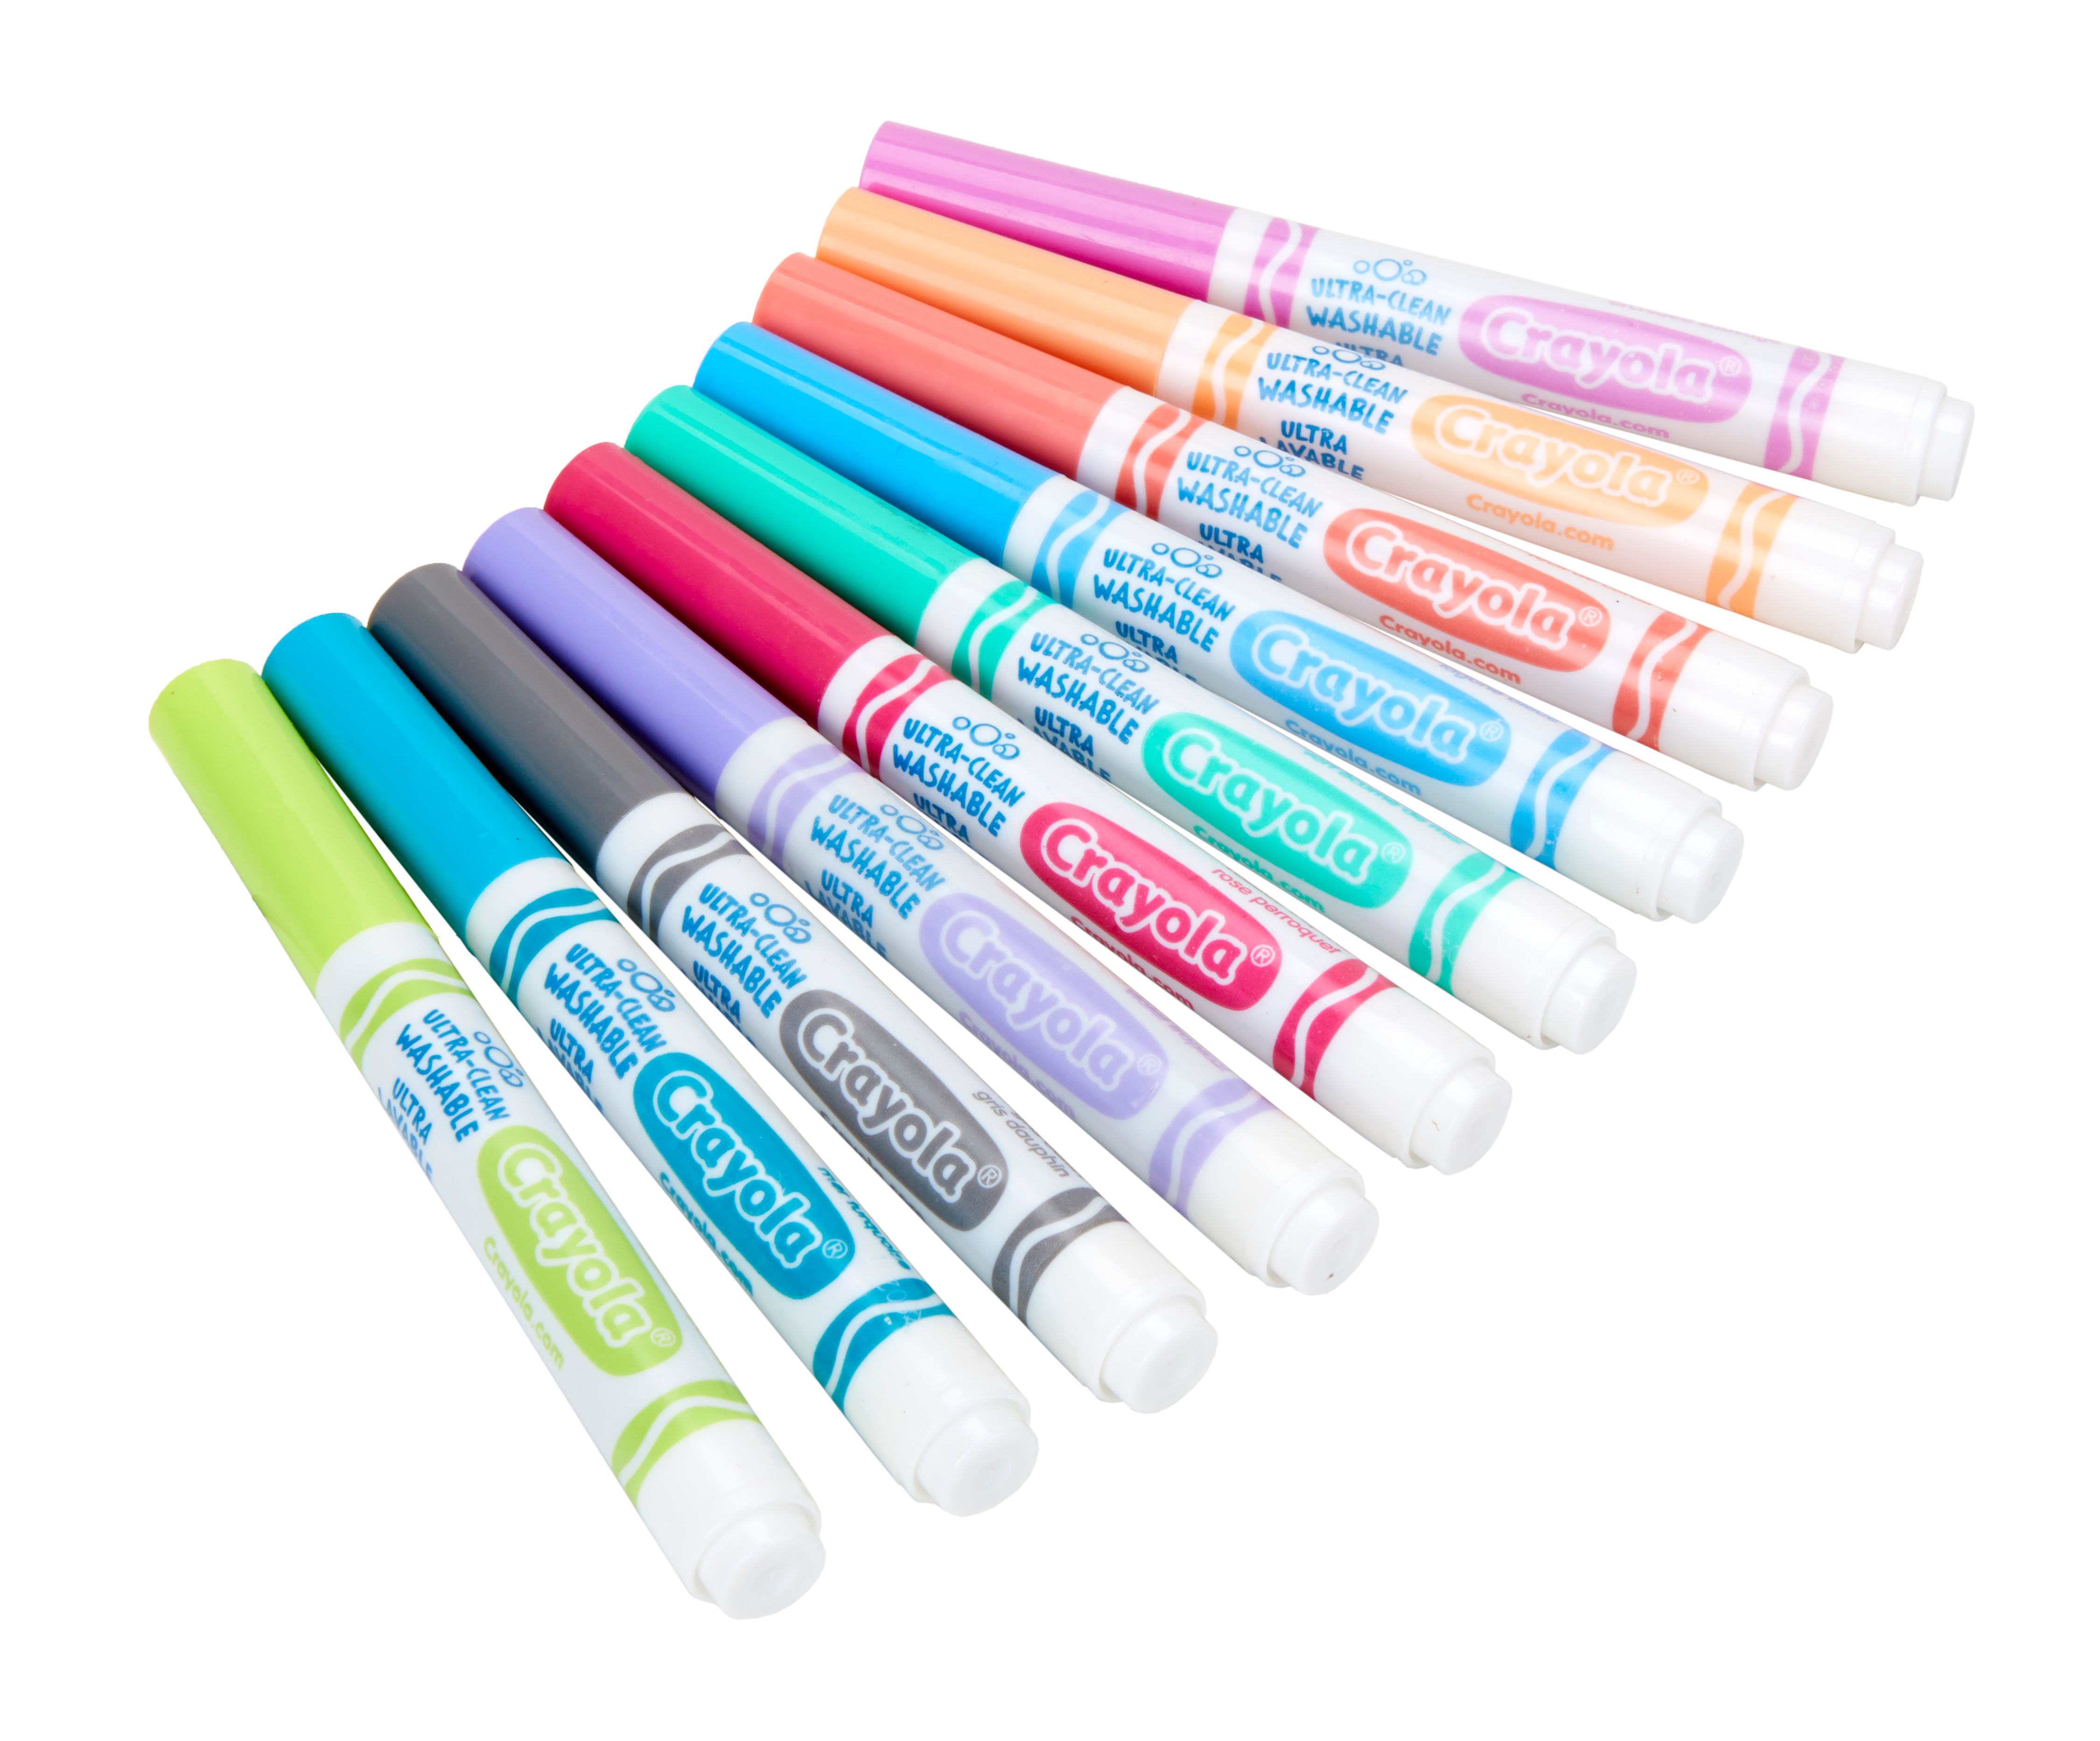 Crayola Ultra-Clean Washable Broad Line Markers, Back to School Supplies, 20 Ct, Classic Colors - image 4 of 8